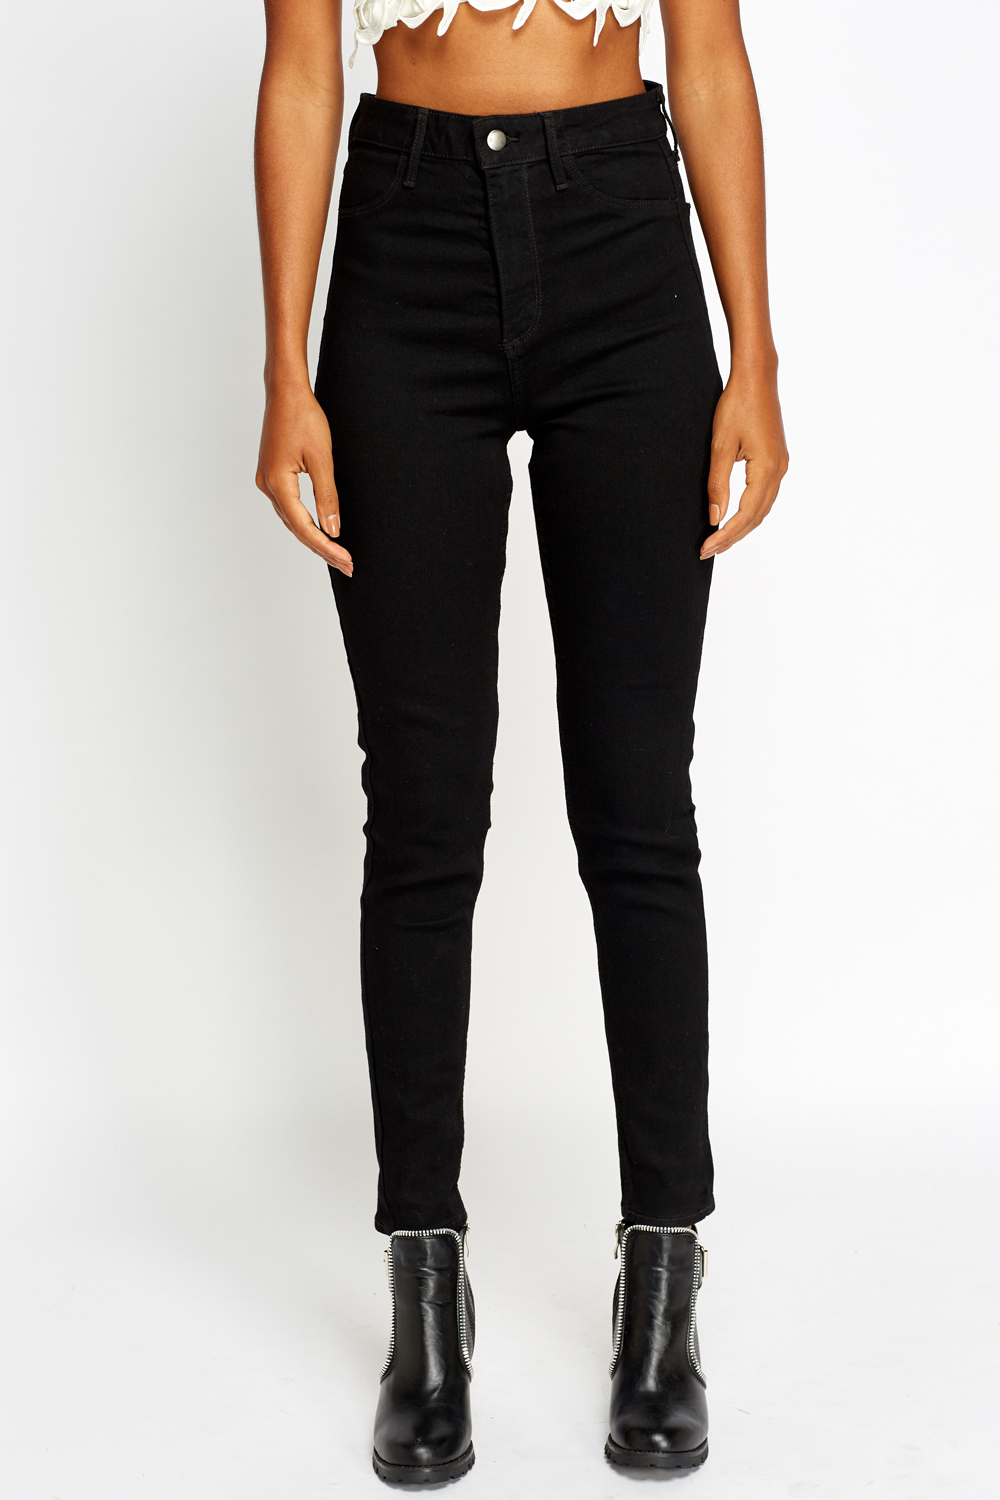 Skinny High Waisted Black Jeans - Just $7